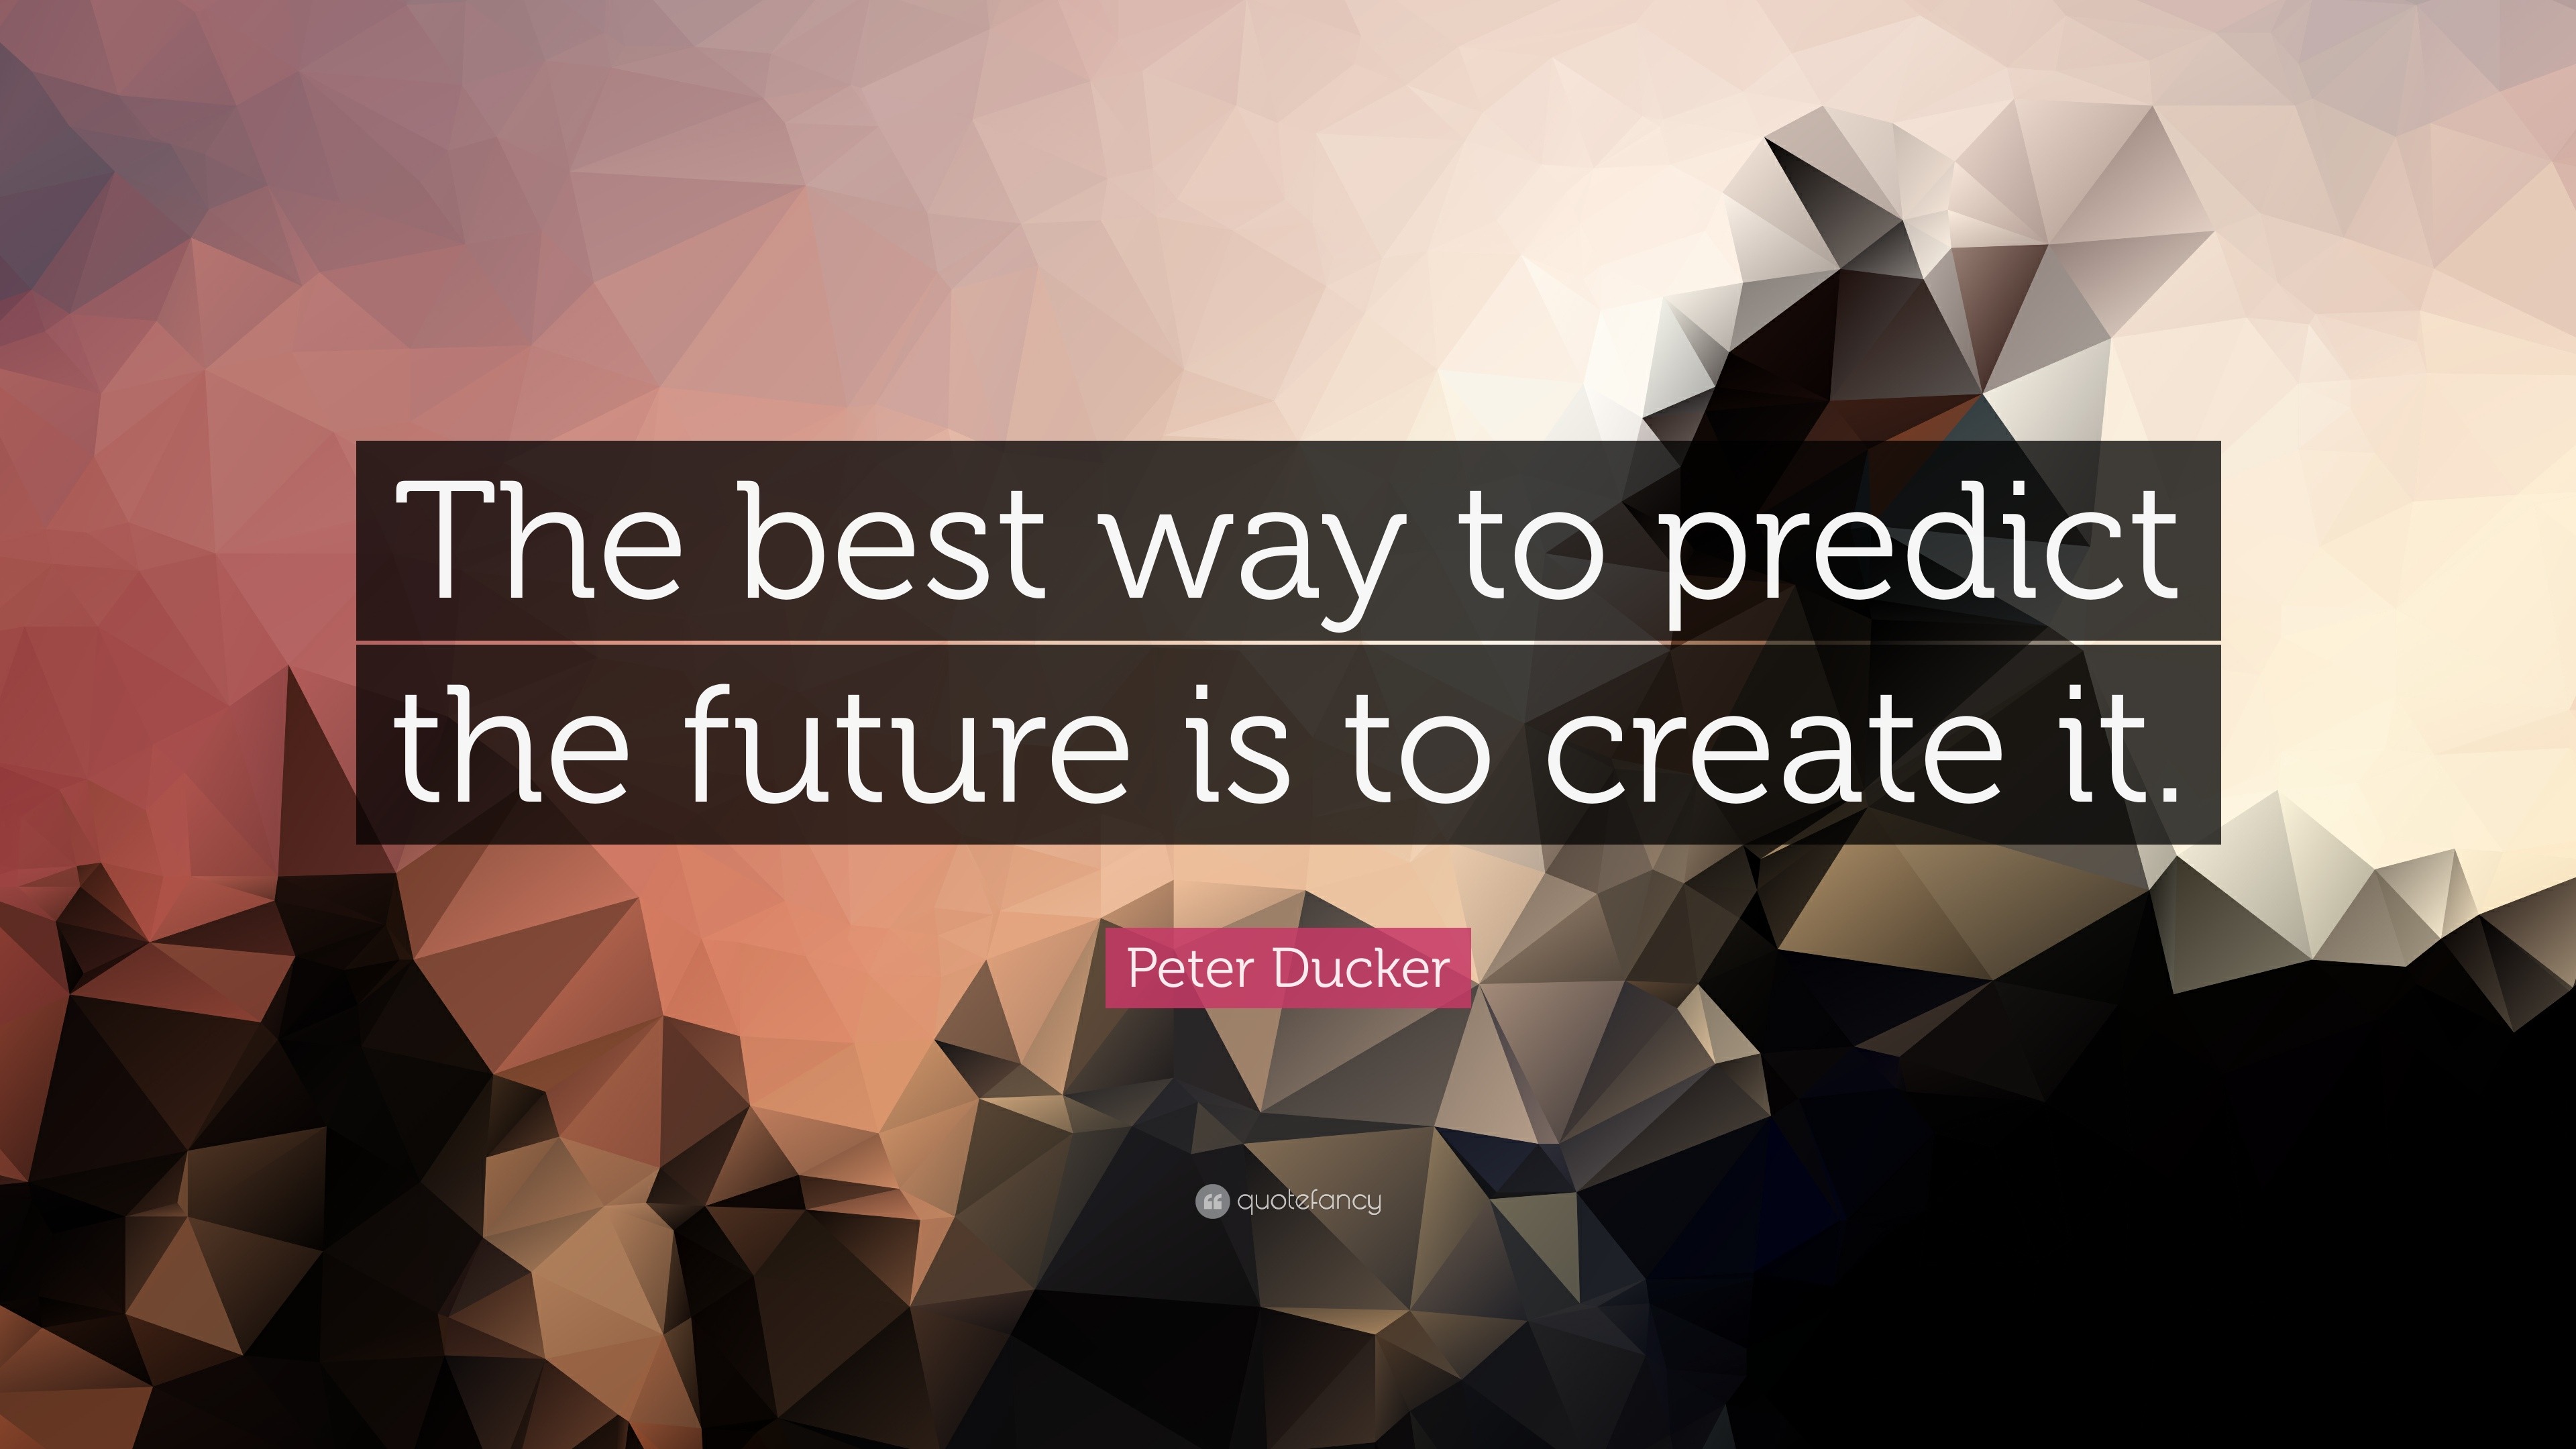 Peter Ducker Quote: “The best way to predict the future is to create it